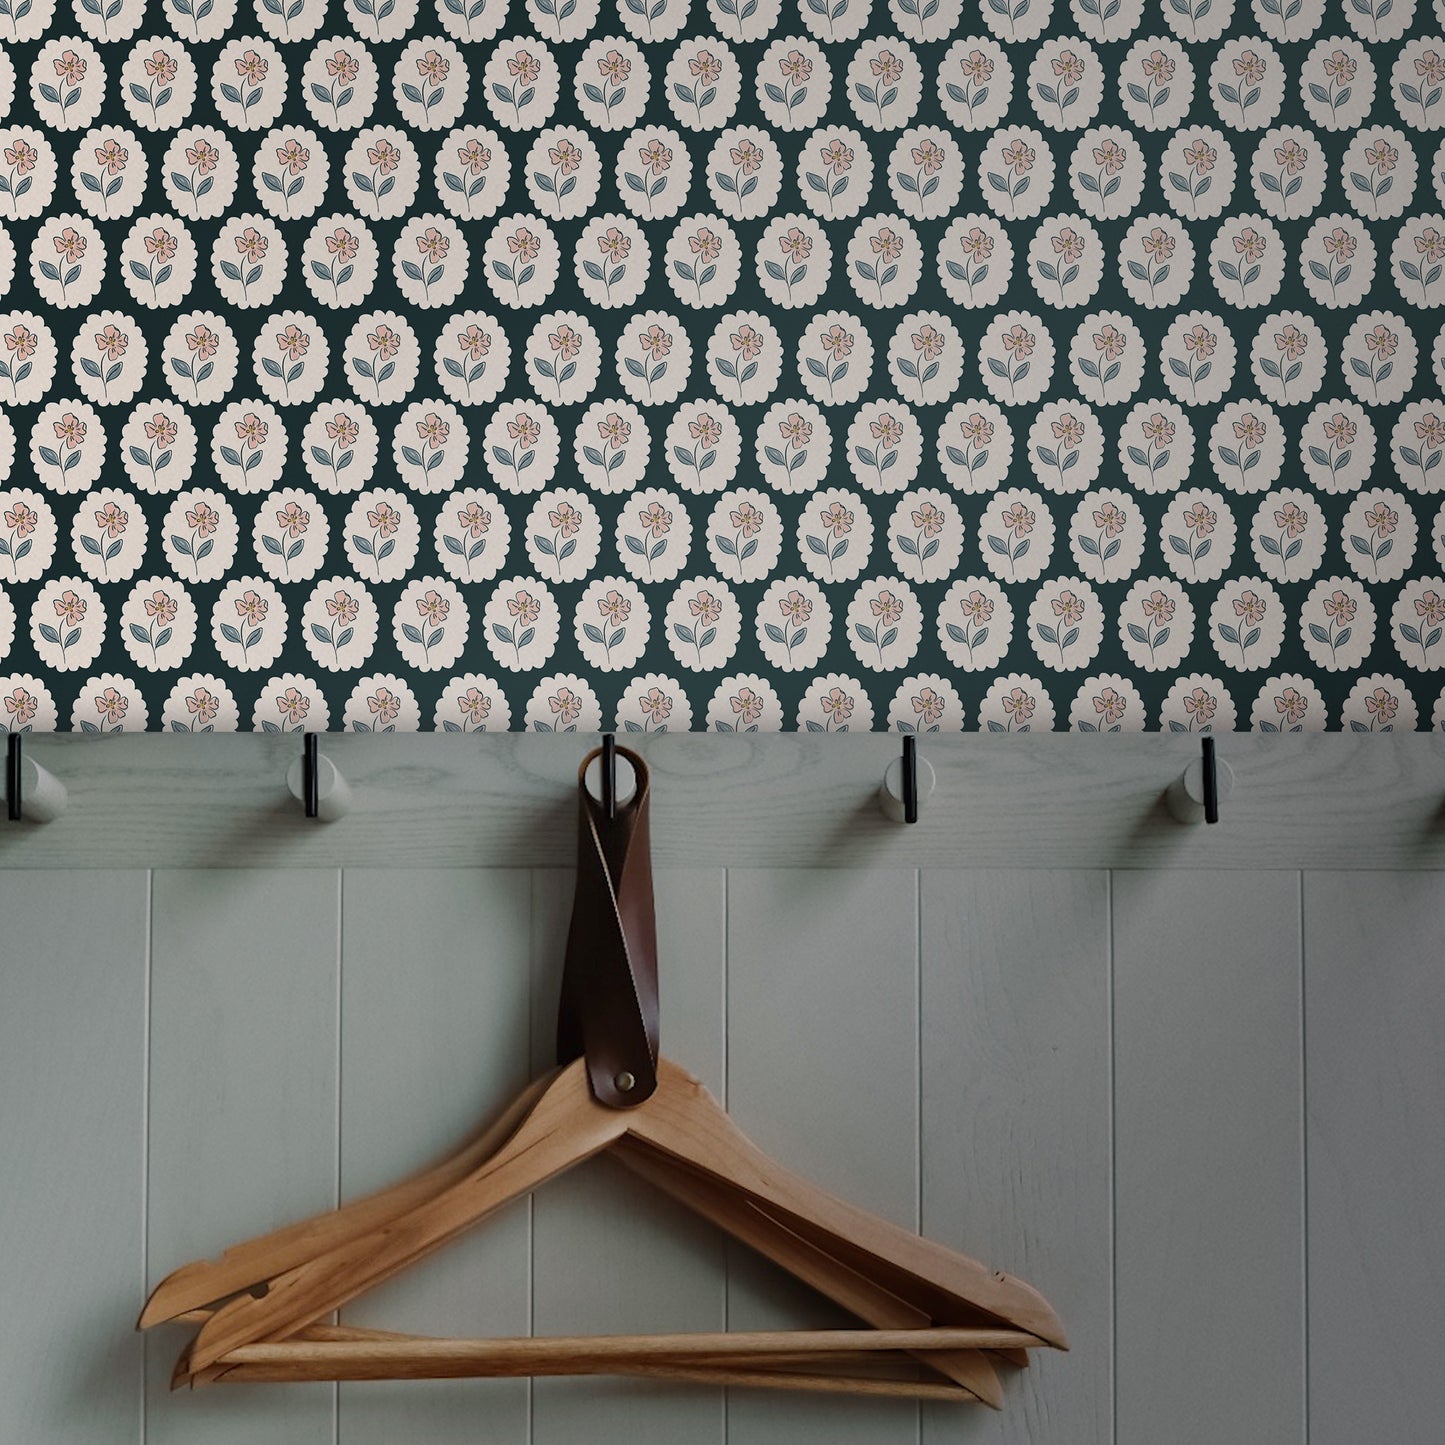 Mudroom featuring Dancing Petals Peel and Stick, Removable Wallpaper in Dark Green